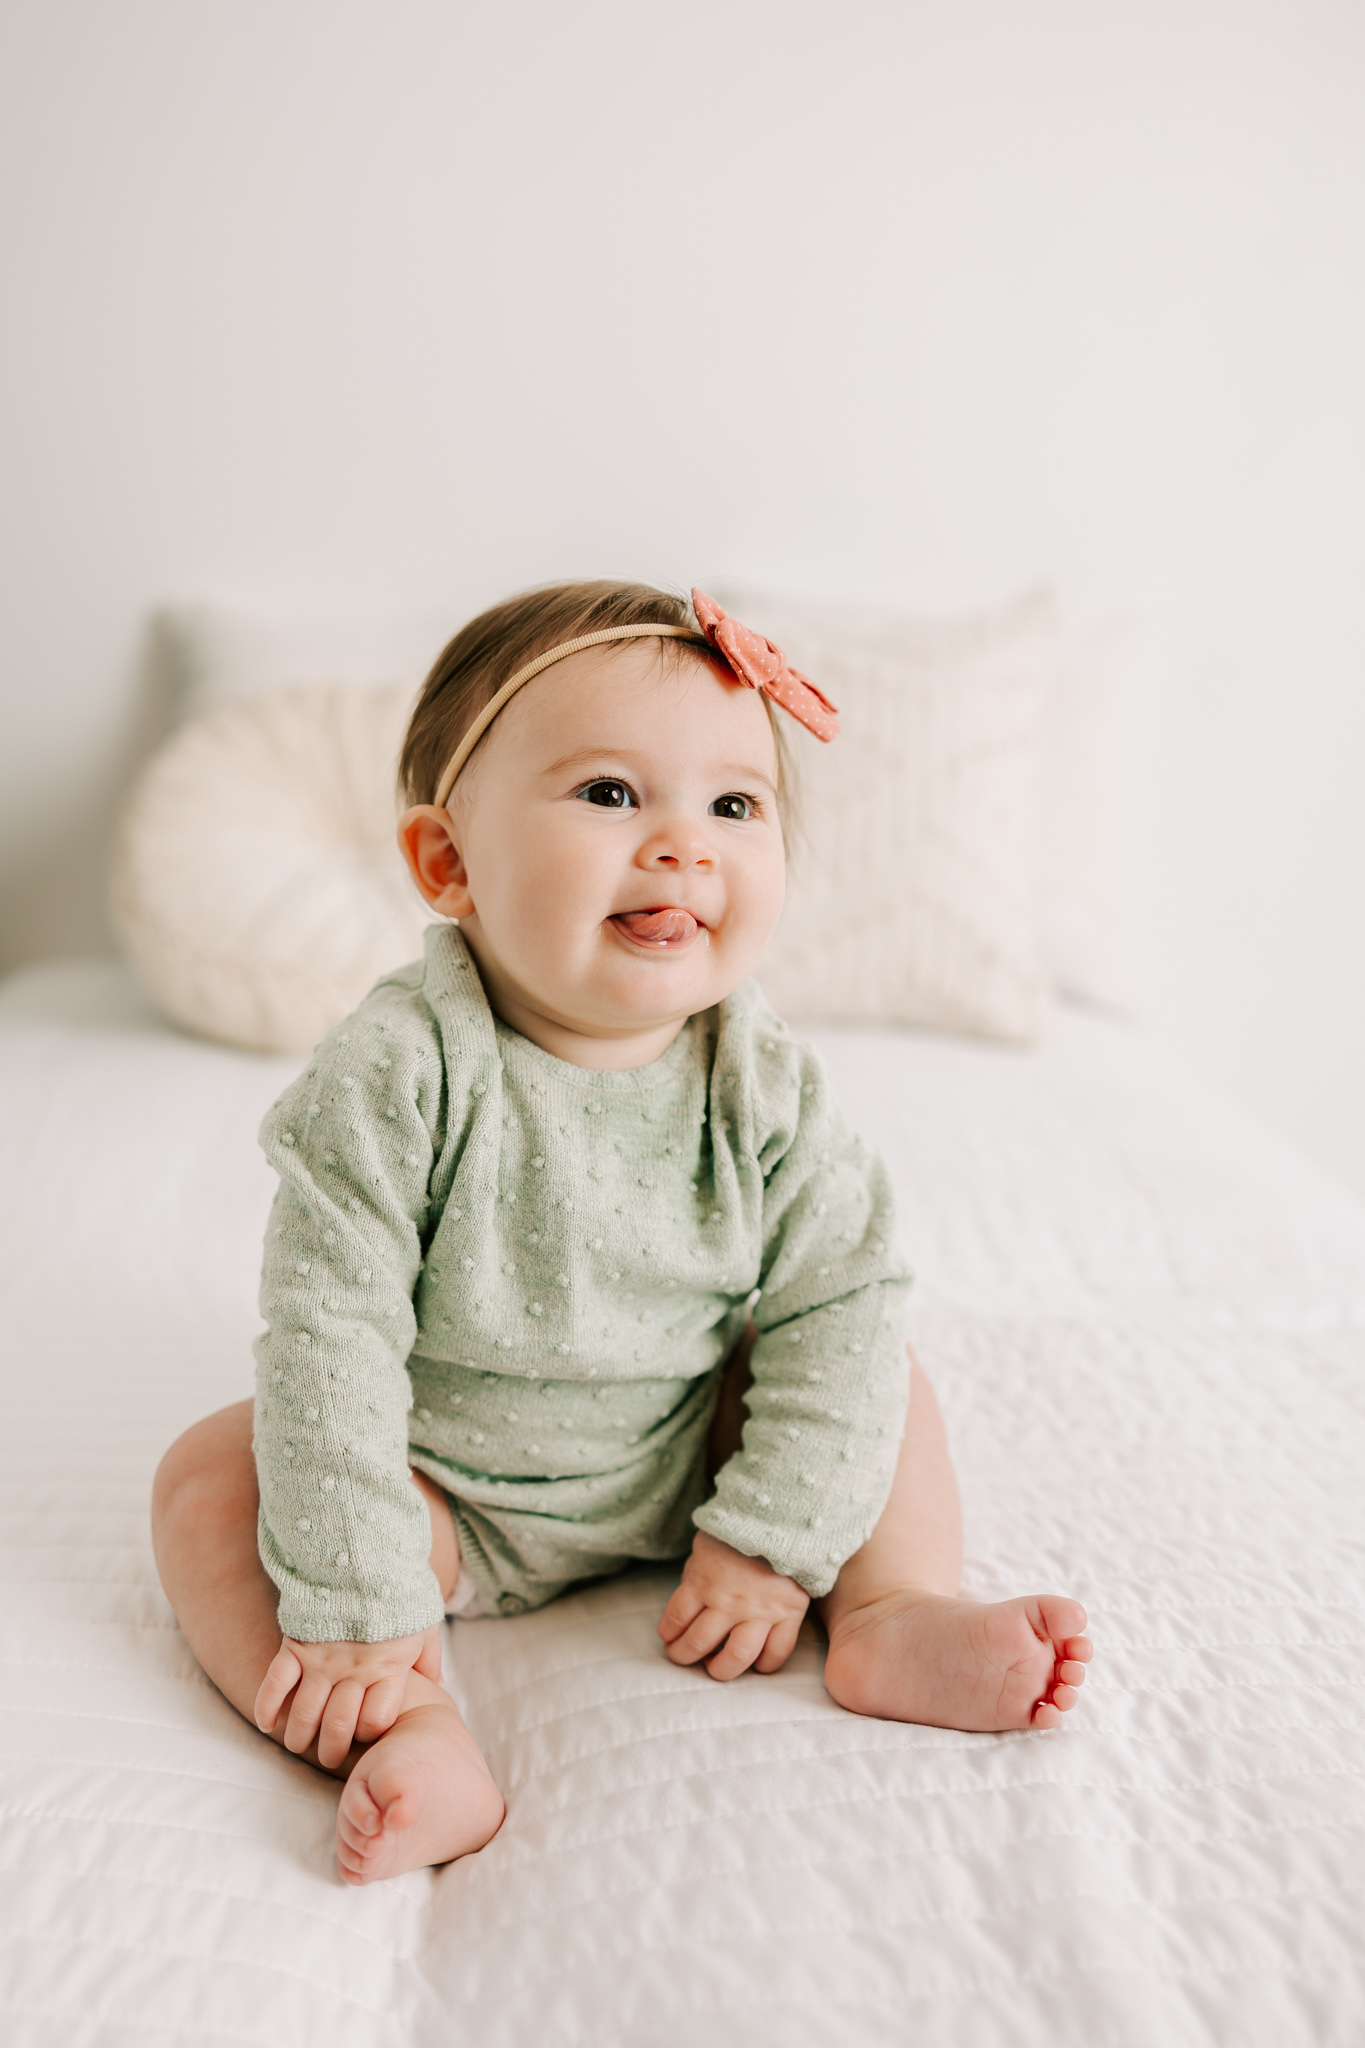 Little six month old girl is showing offer her tongue during her atlanta baby photography session with molly berry photography